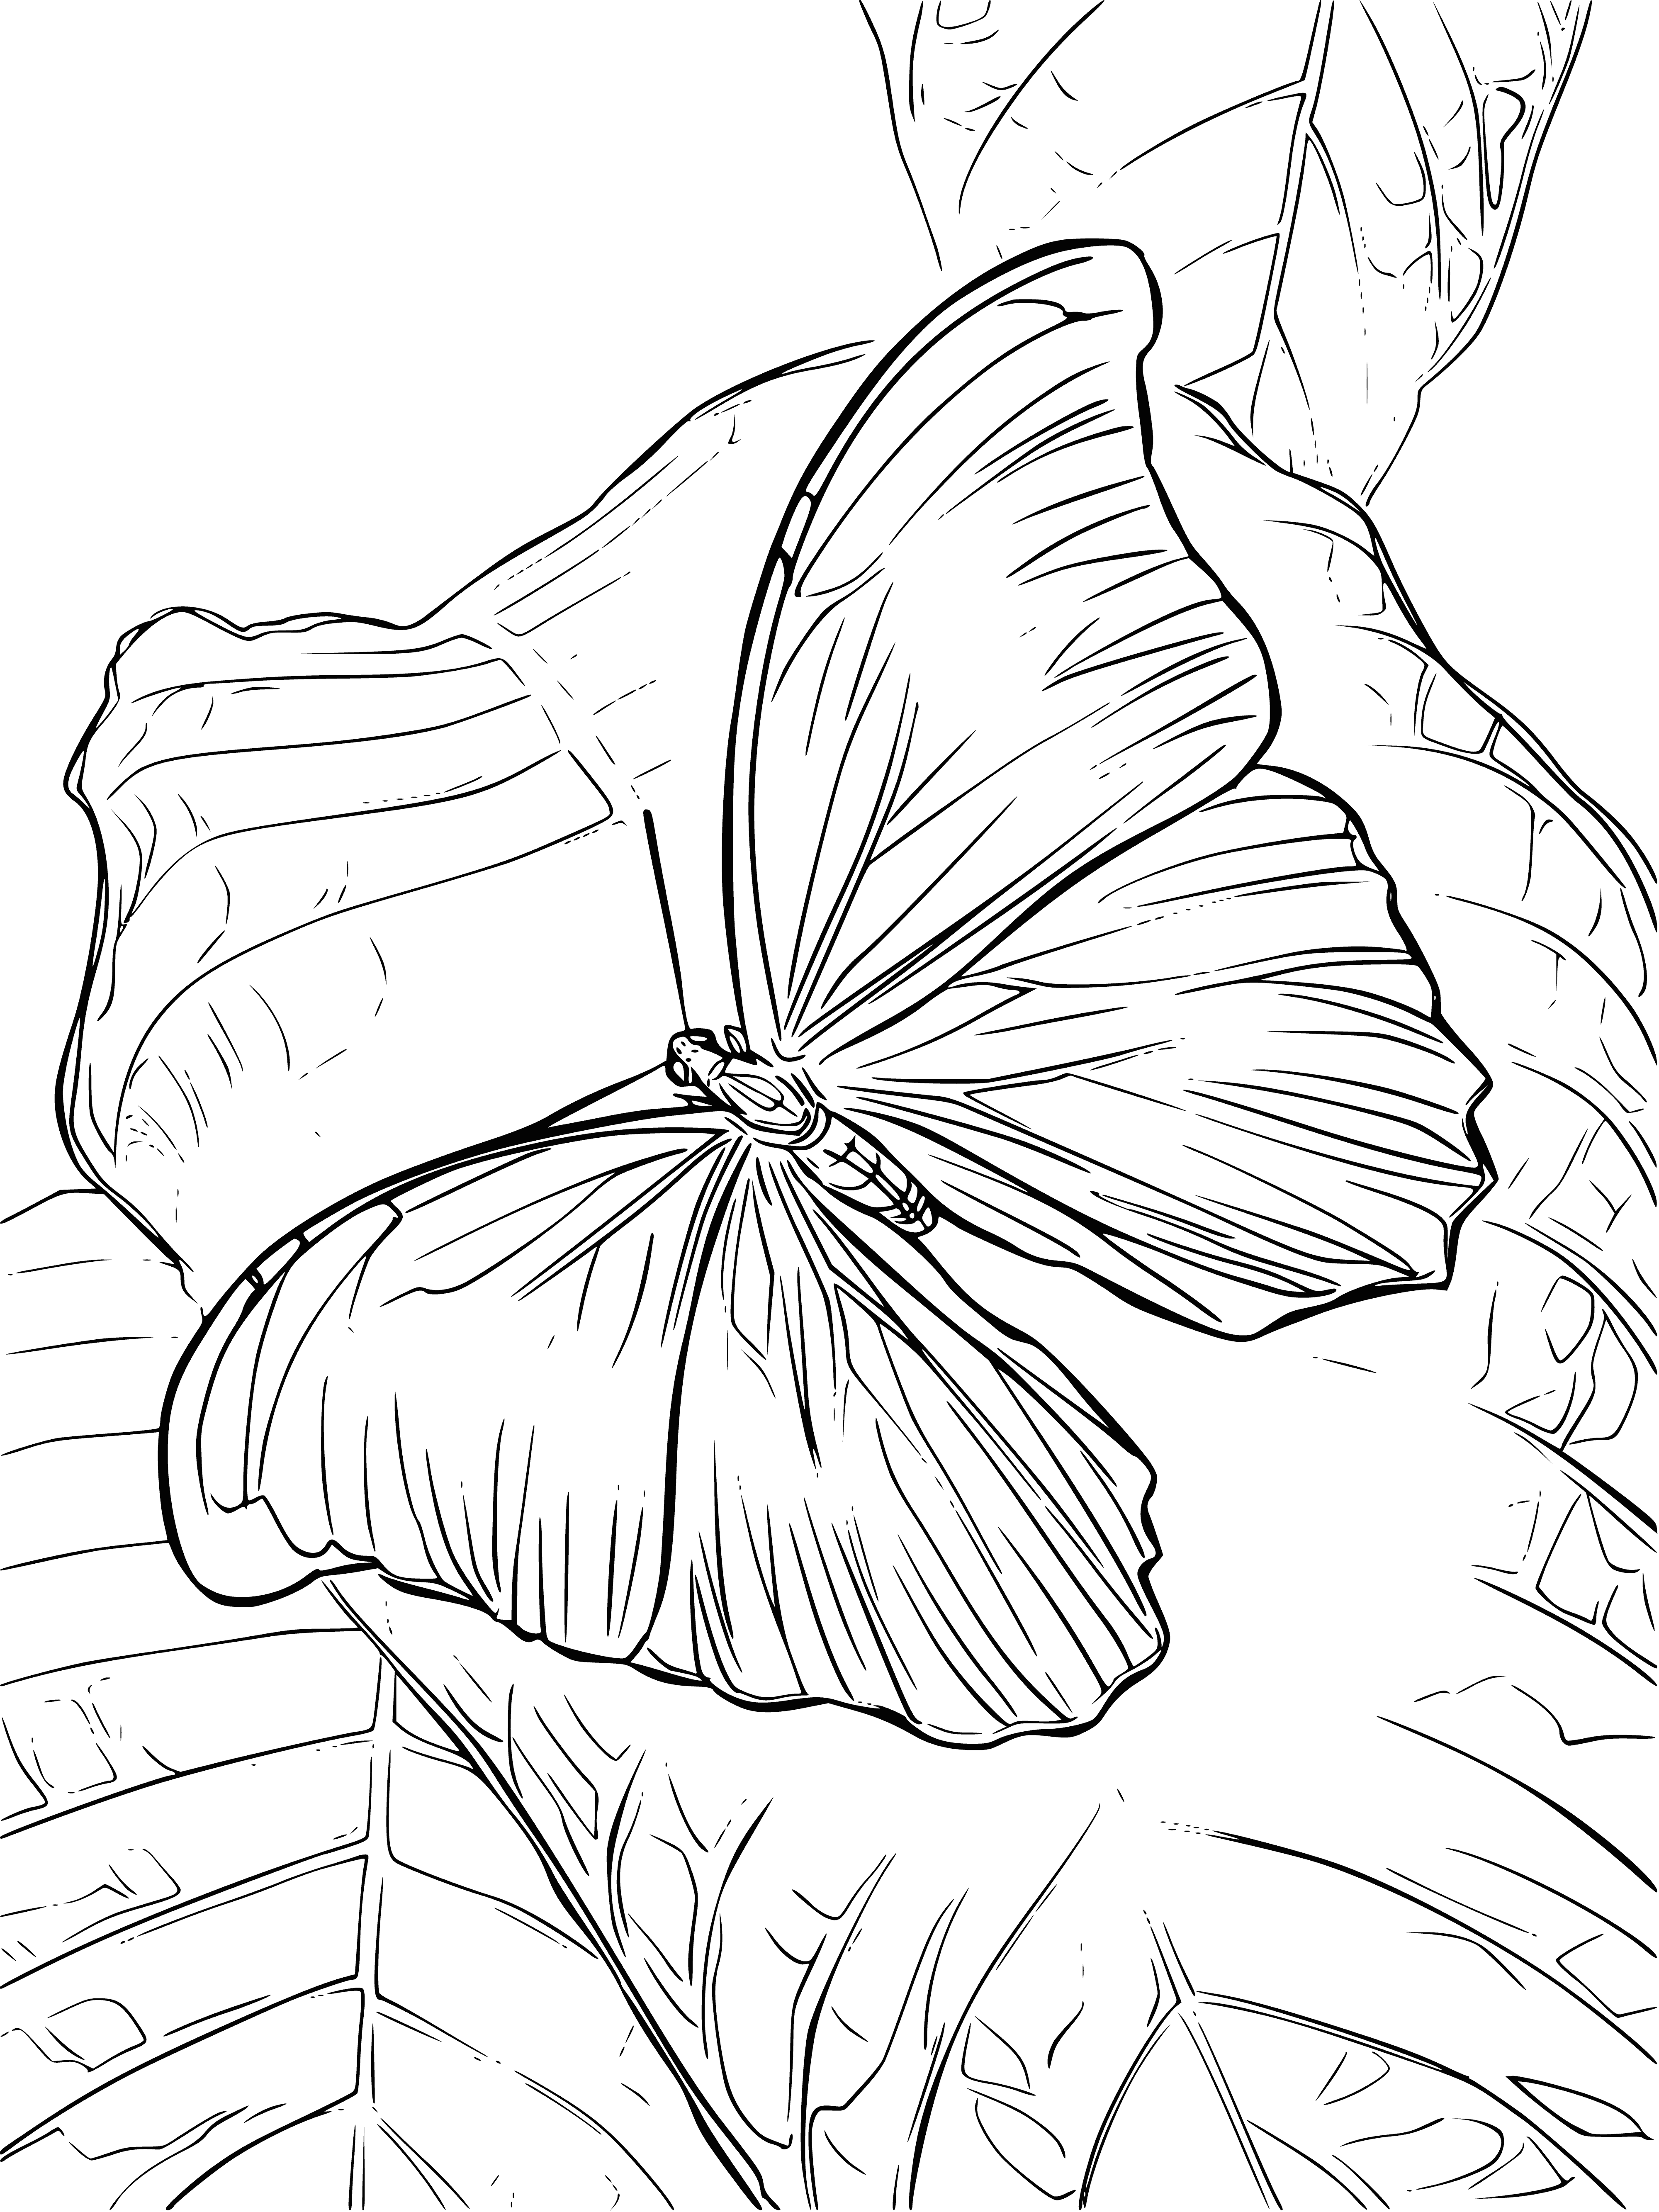 Butterfly on a leaf coloring page